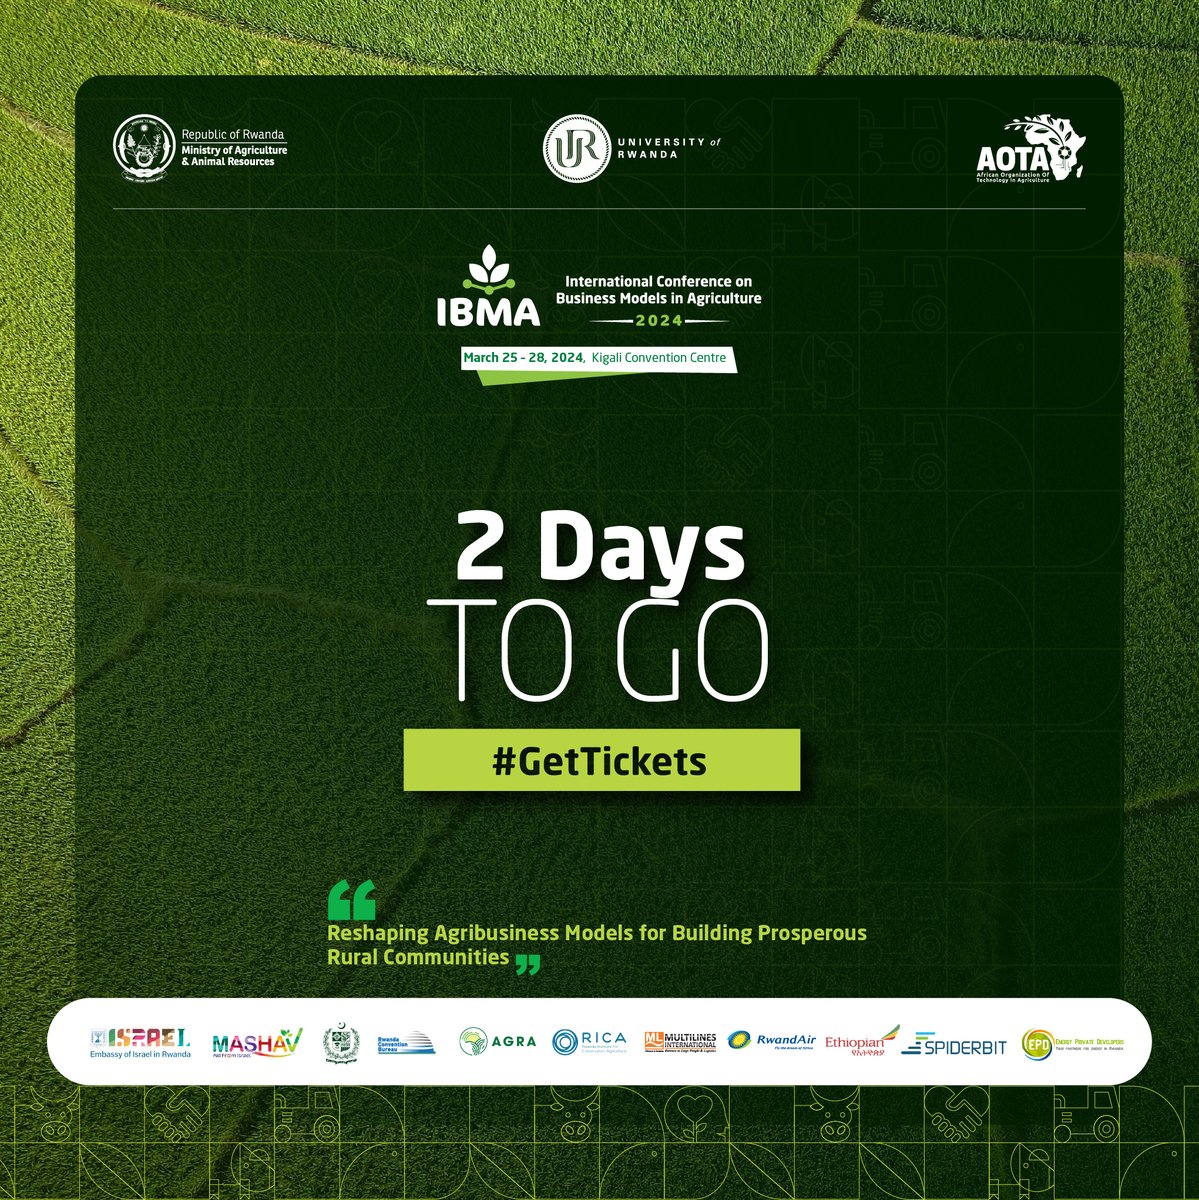 We are less than 48 hours away from #IBMA2024 ⌛️

Not able to join us live? Follow us here, stay tuned.

Stay tuned on the activities that will be happening over the 4 days Conference: 25th - 28th

#agribusiness #agriculture #businessmodels #farming #foodsecurity #Agirite